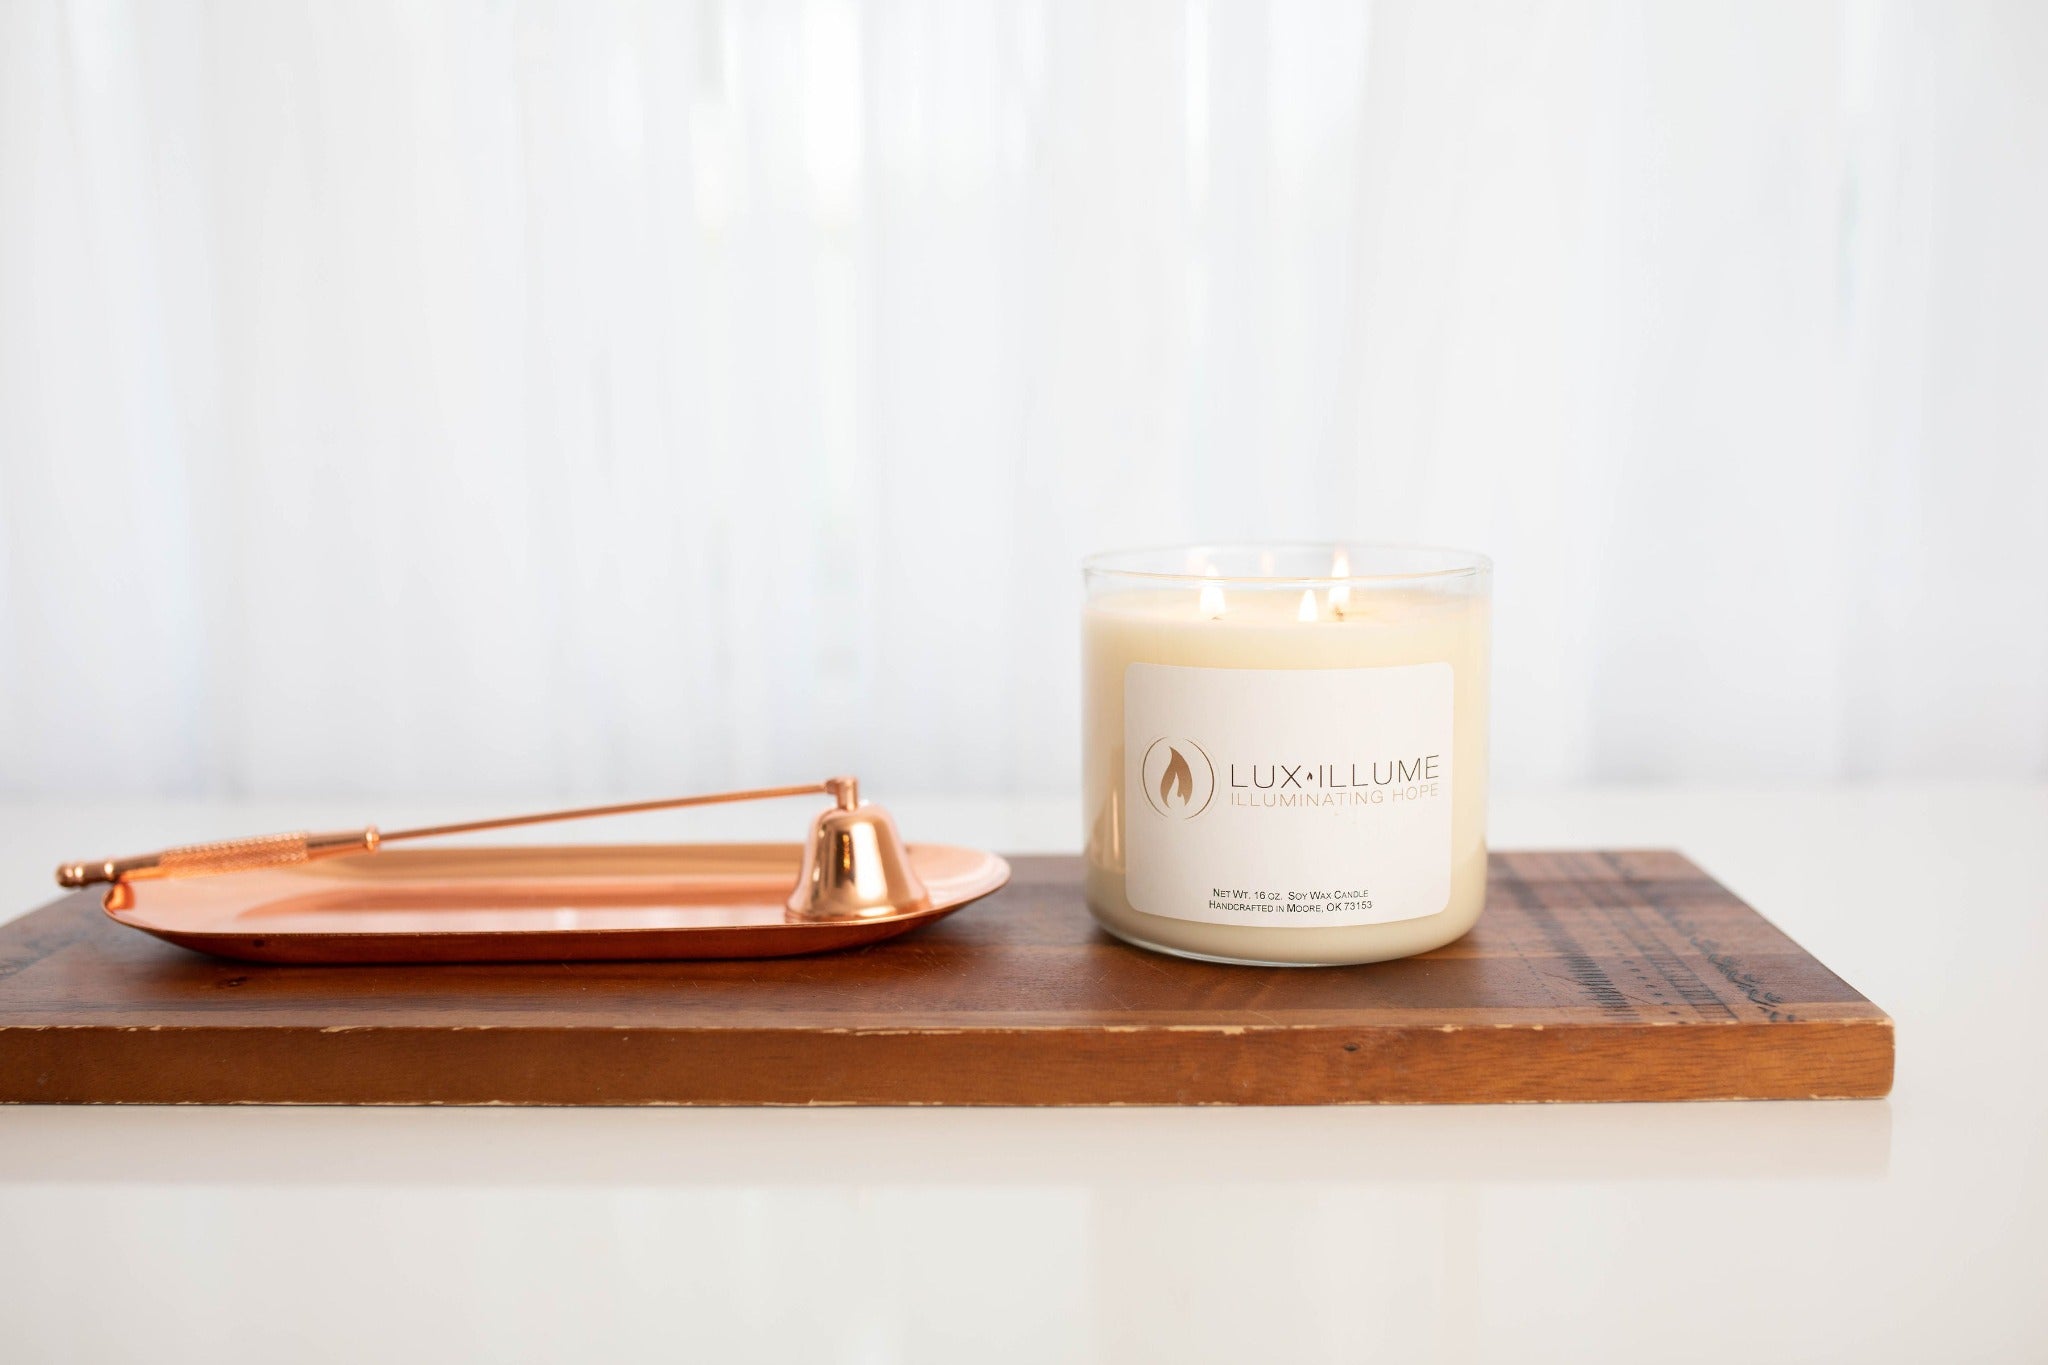 A three-wick clear glass candle with natural ivory wax.  It’s sitting on top of a wood block. Next to it on the left is a copper snuffer and tray.